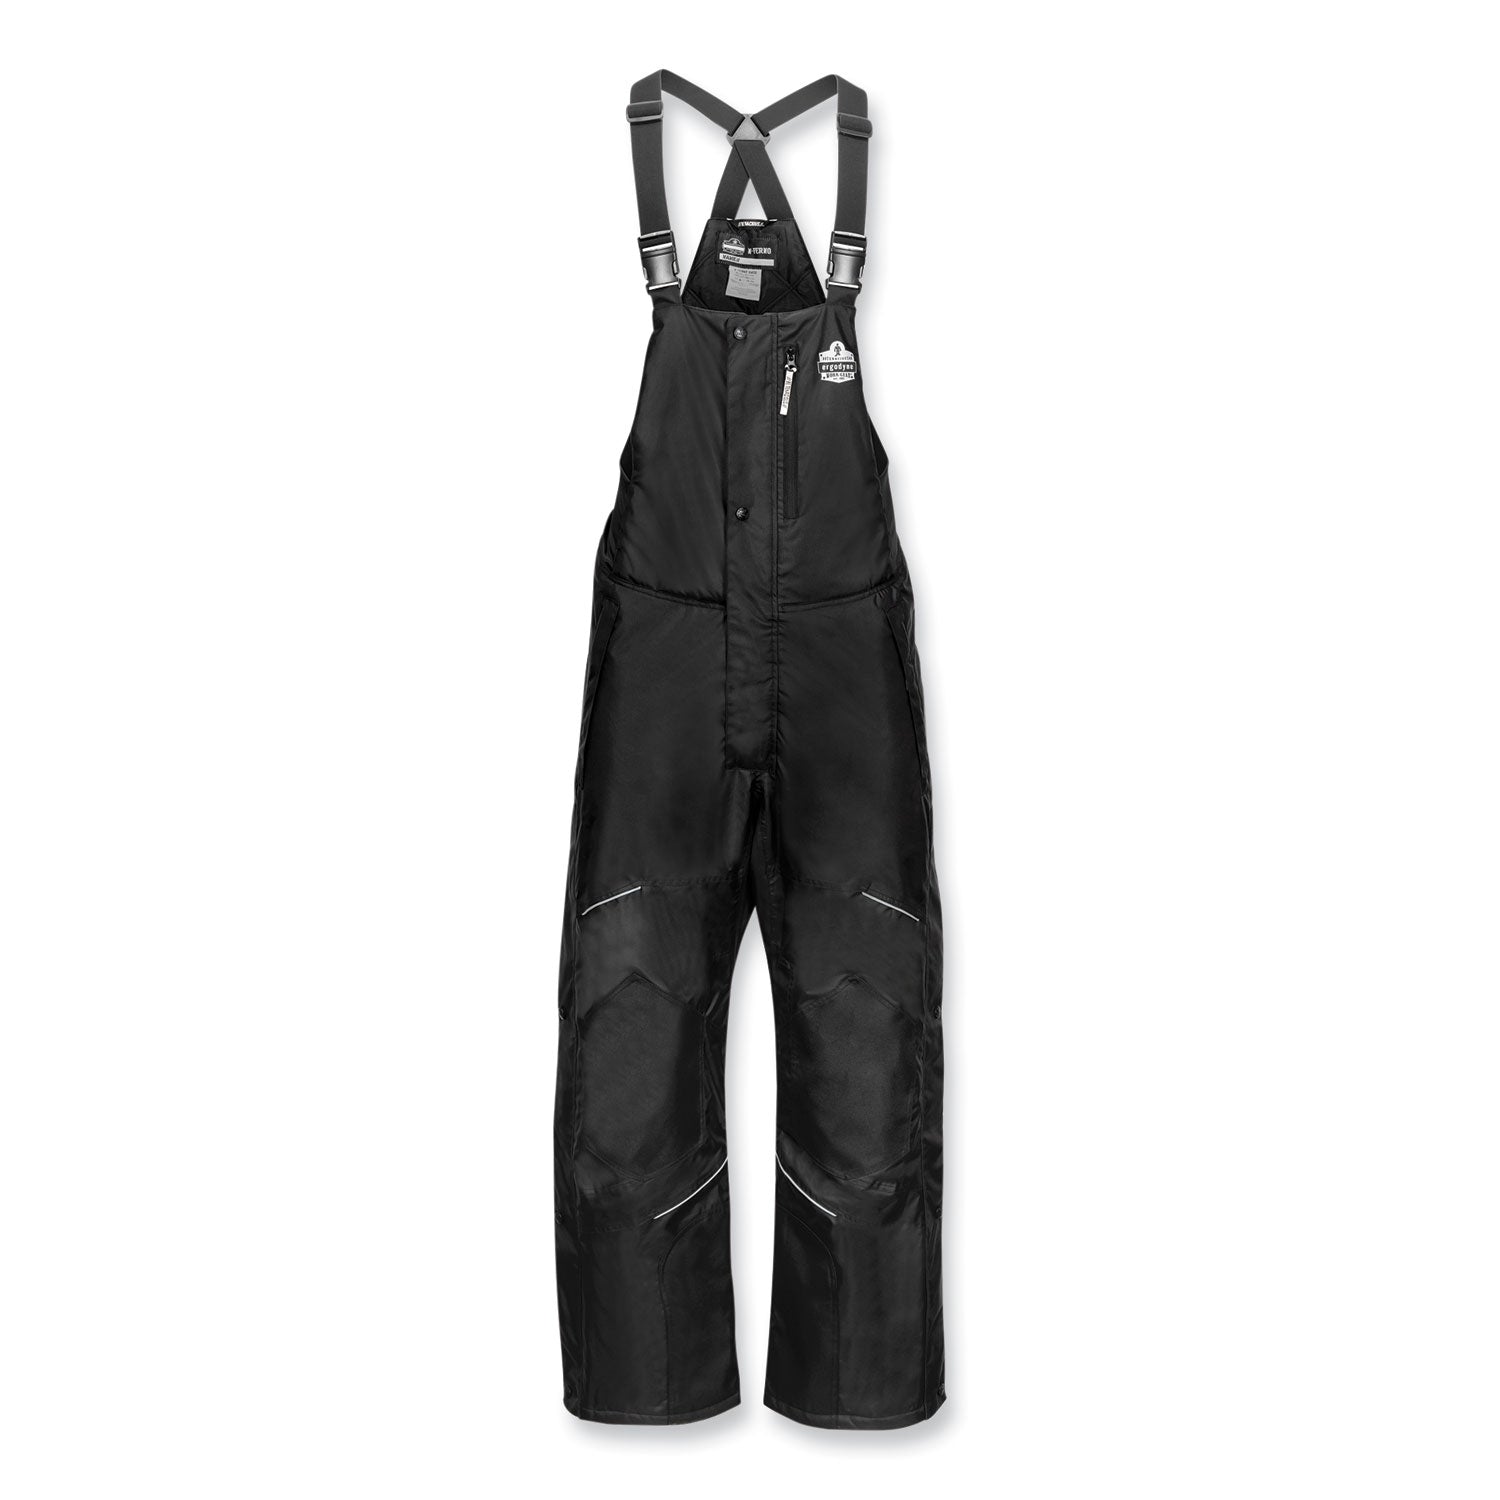 n-ferno-6472-thermal-bib-with-300d-oxford-shell-small-black-ships-in-1-3-business-days_ego41222 - 1